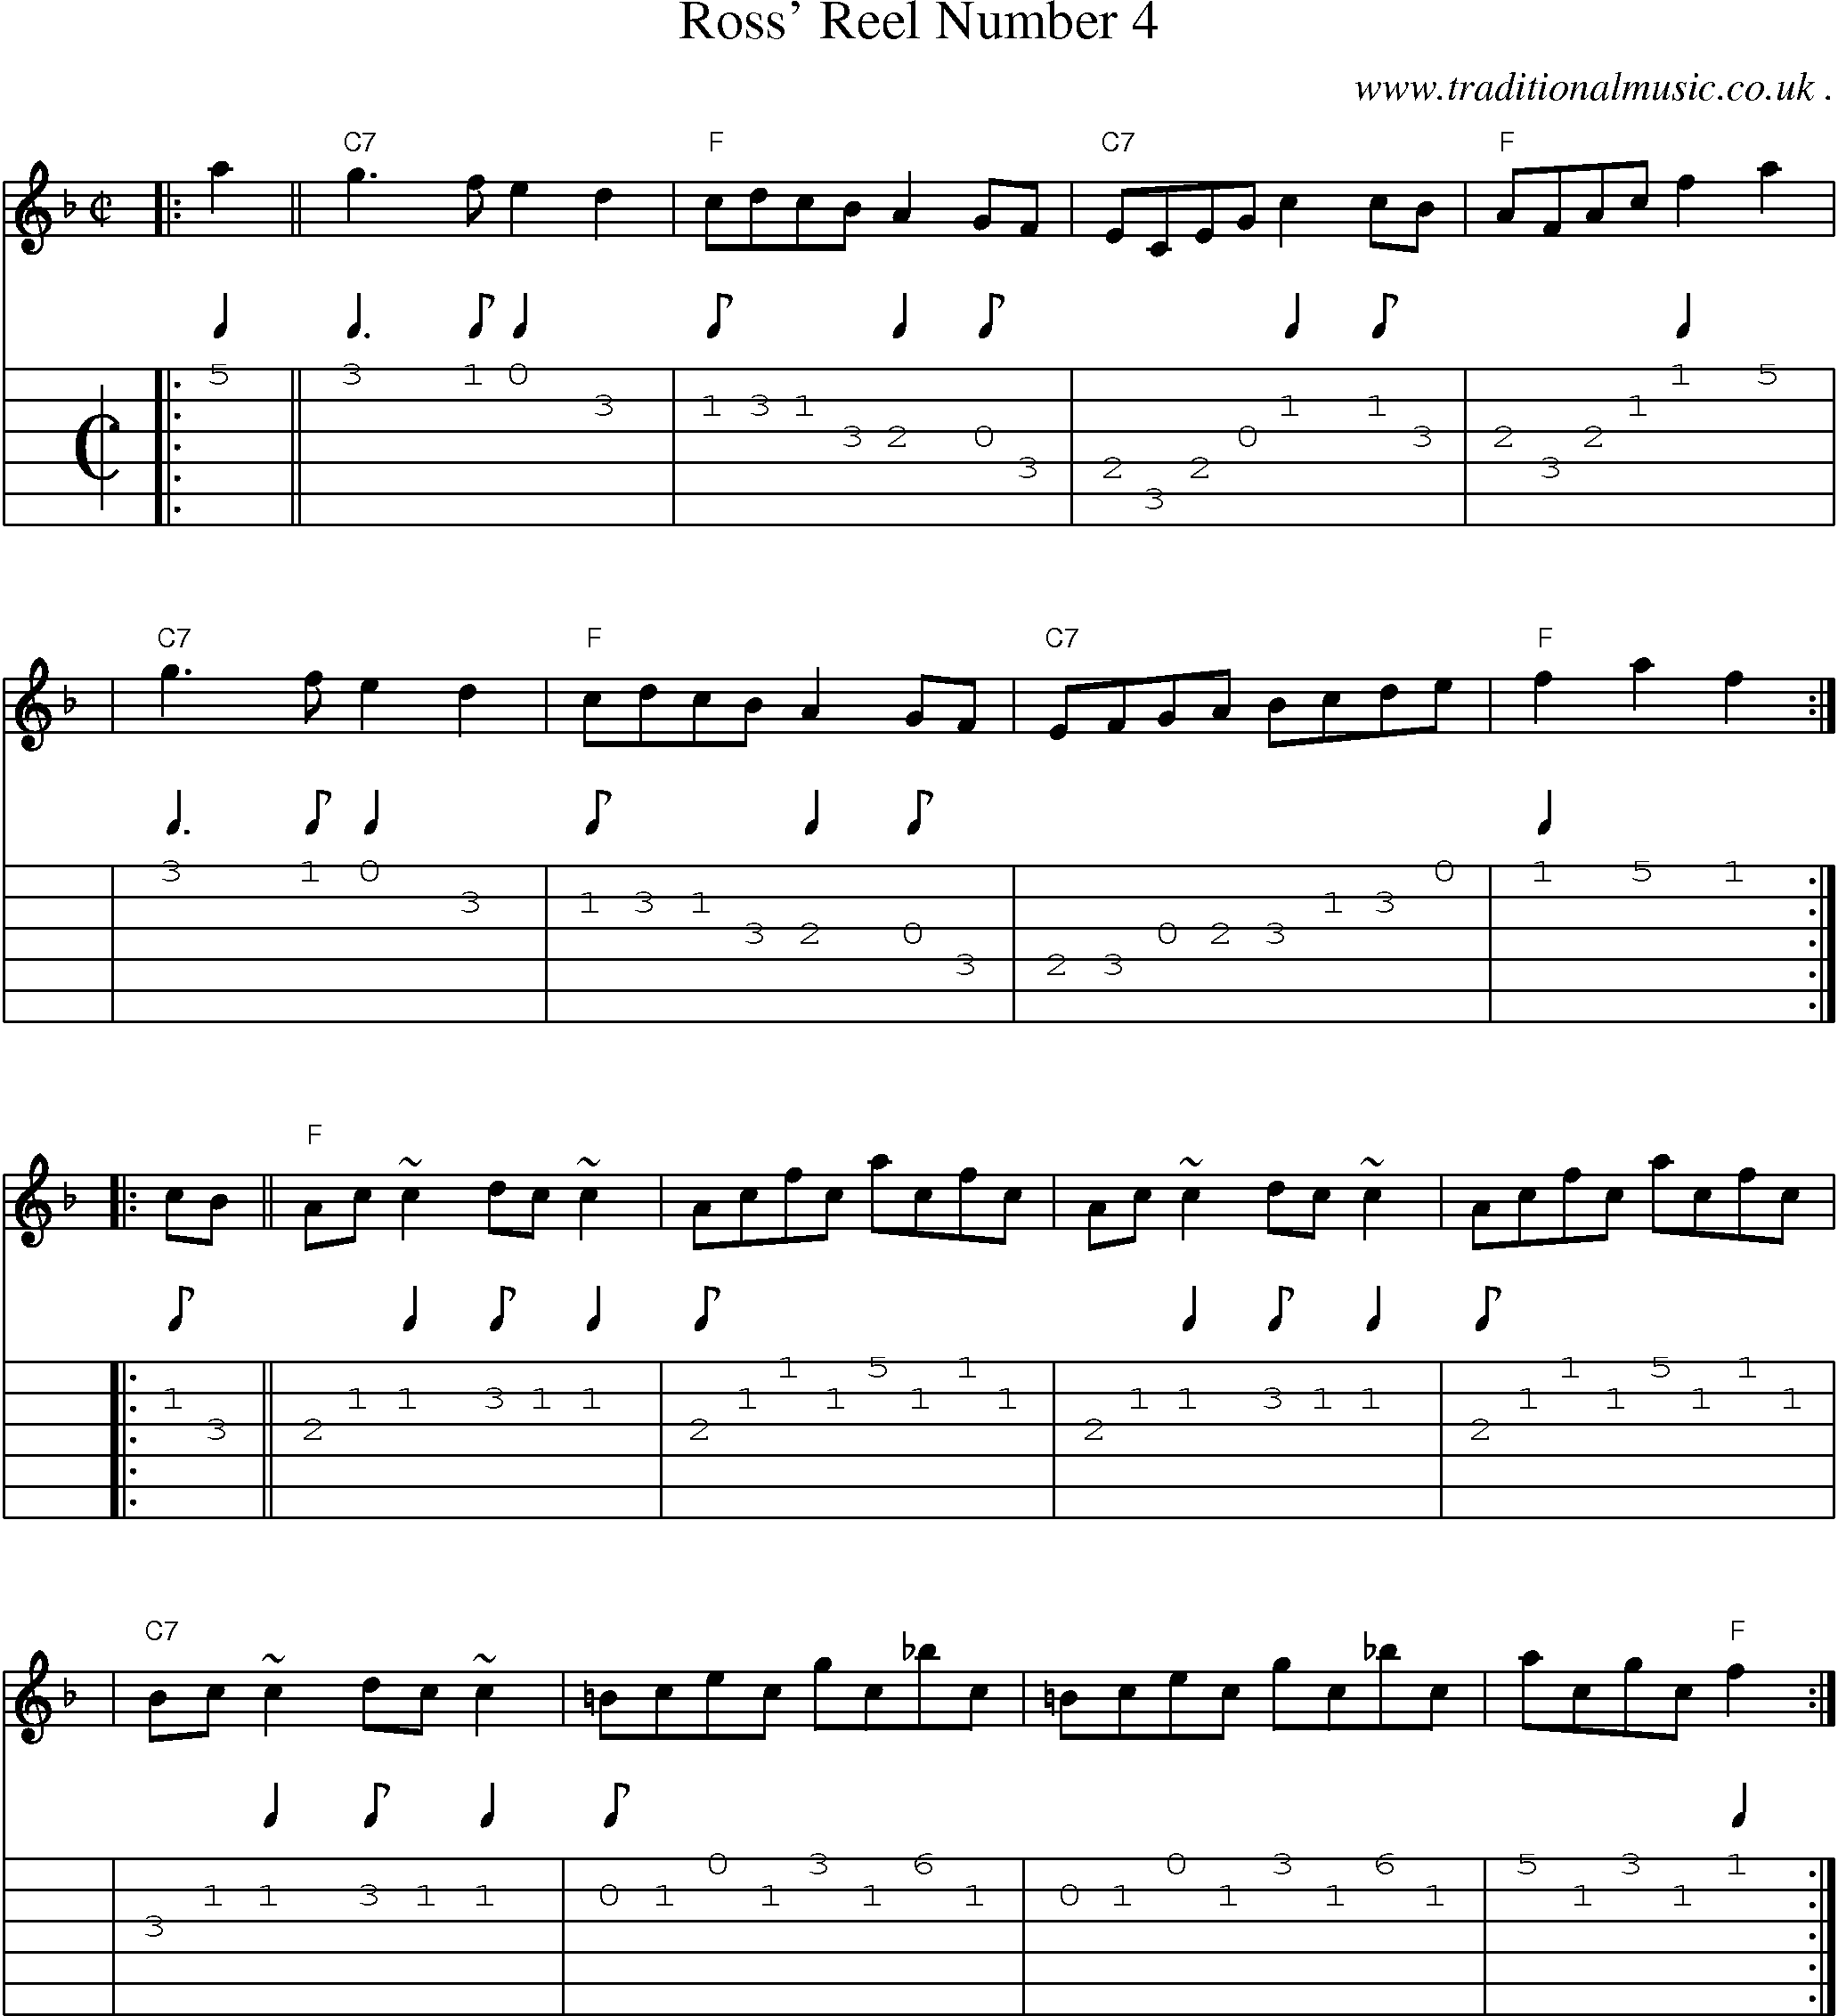 Sheet-music  score, Chords and Guitar Tabs for Ross Reel Number 4